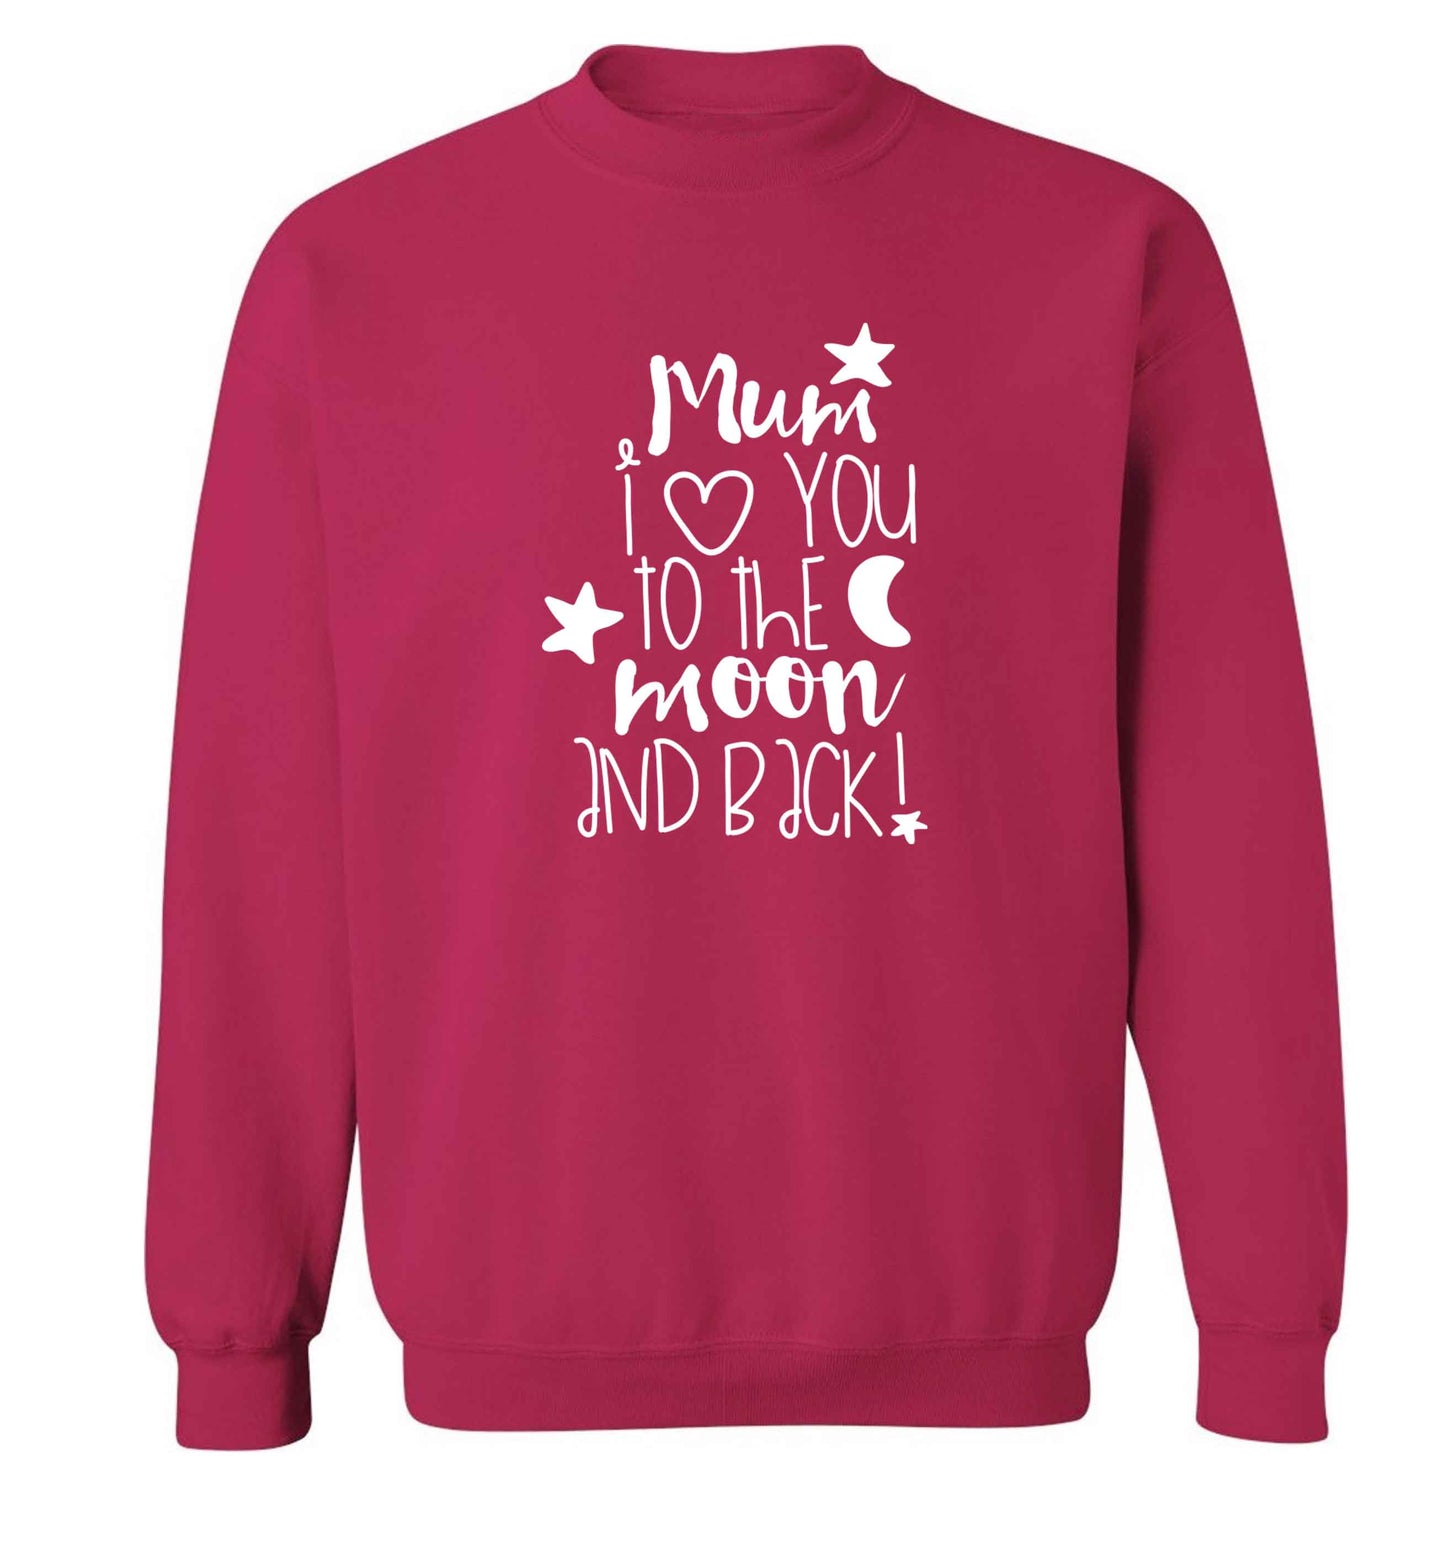 Mum I love you to the moon and back adult's unisex pink sweater 2XL